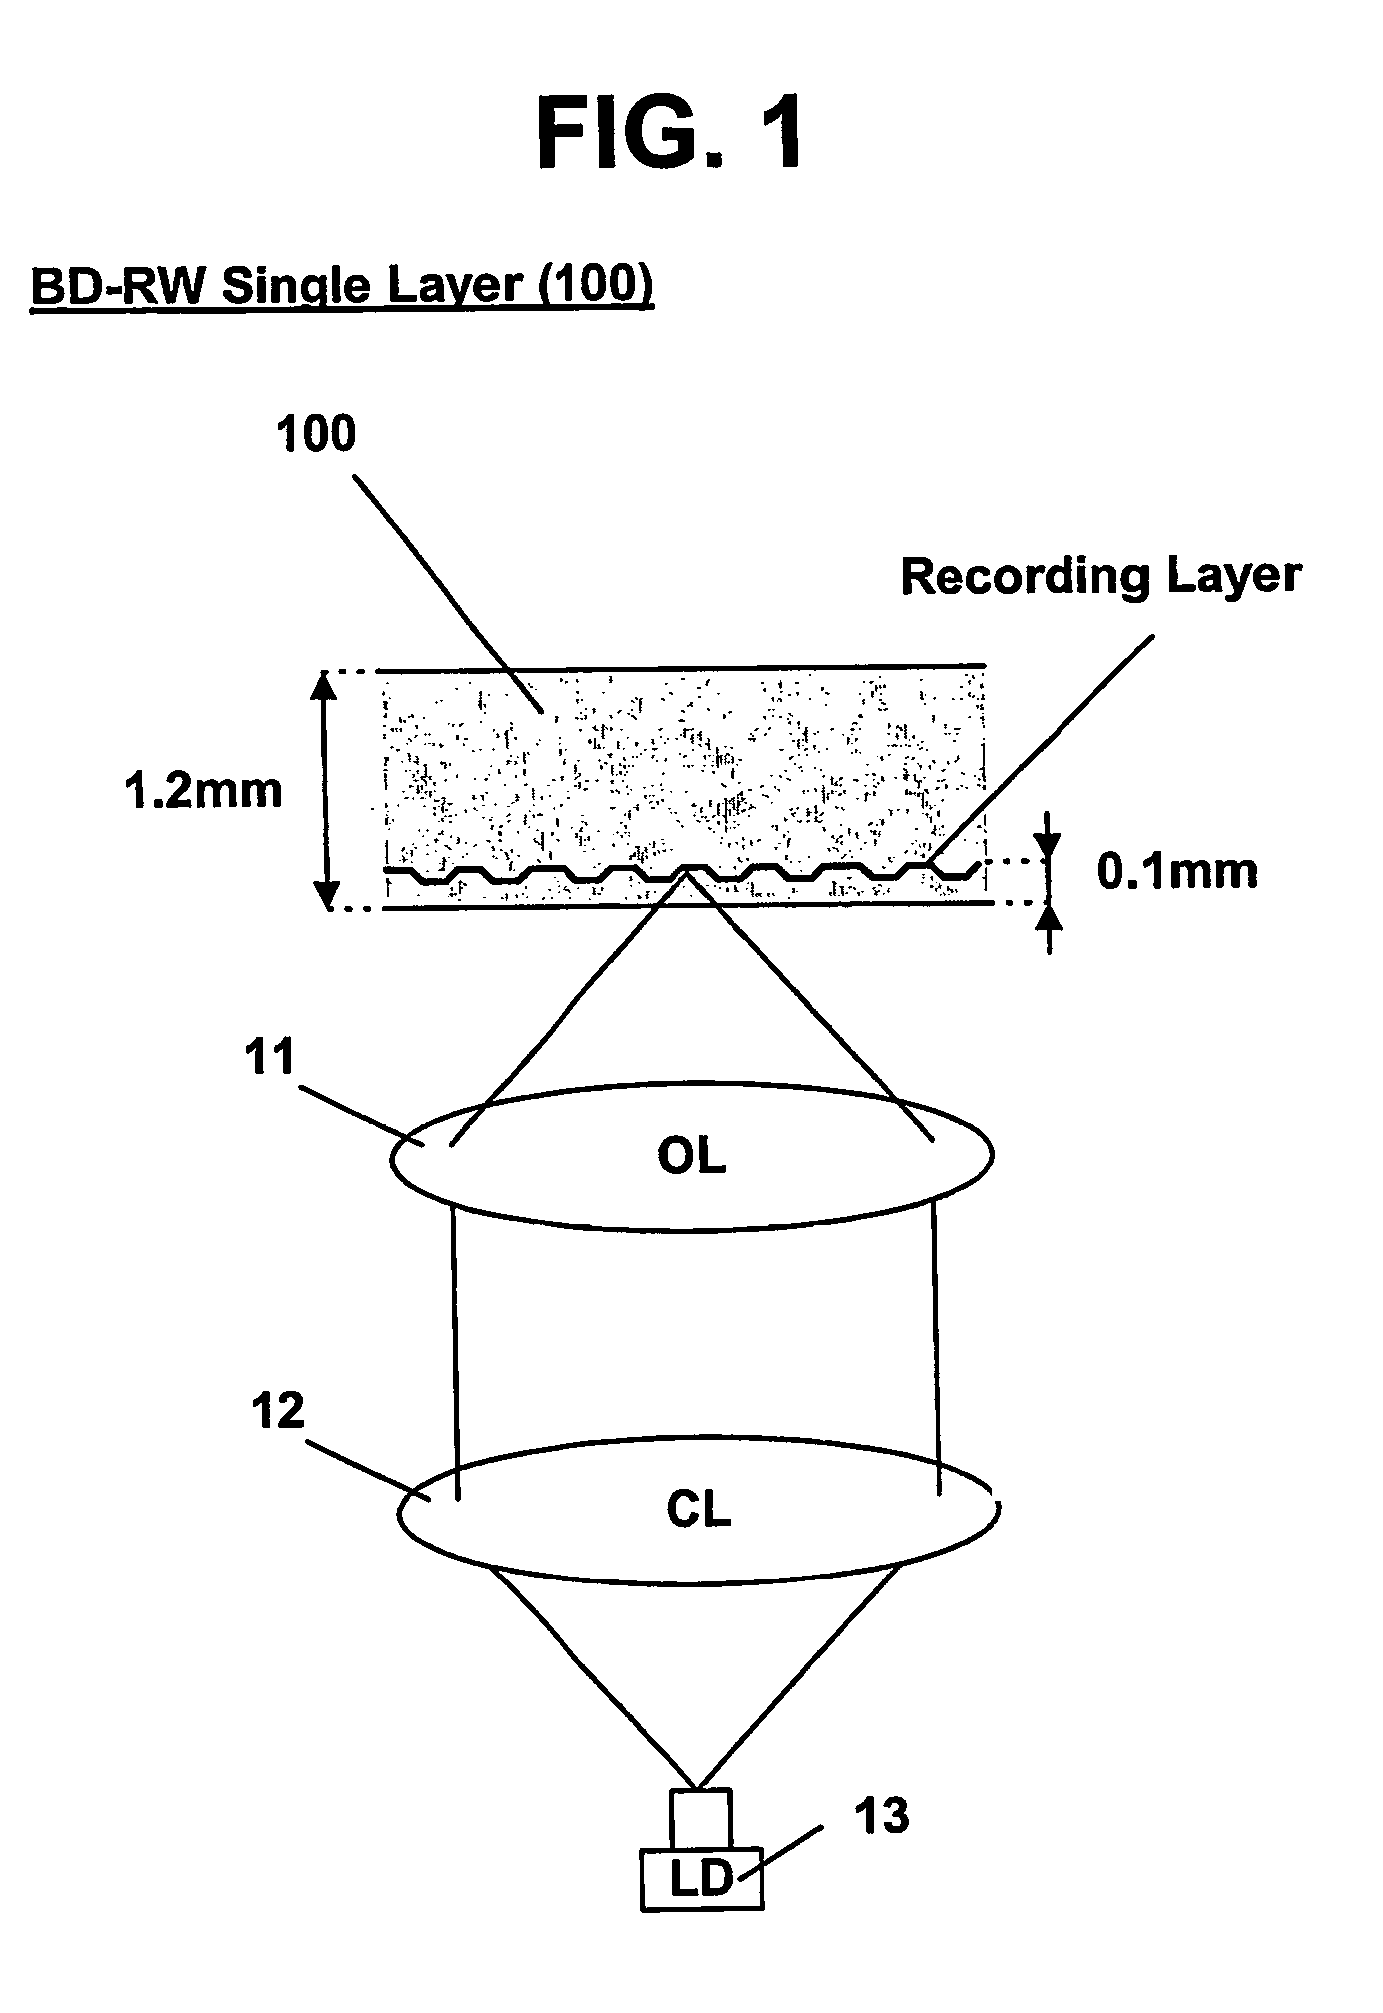 High-density multi-layer optical disc, method for recording data thereon on layer-by-layer basis, and method for managing spare areas thereof